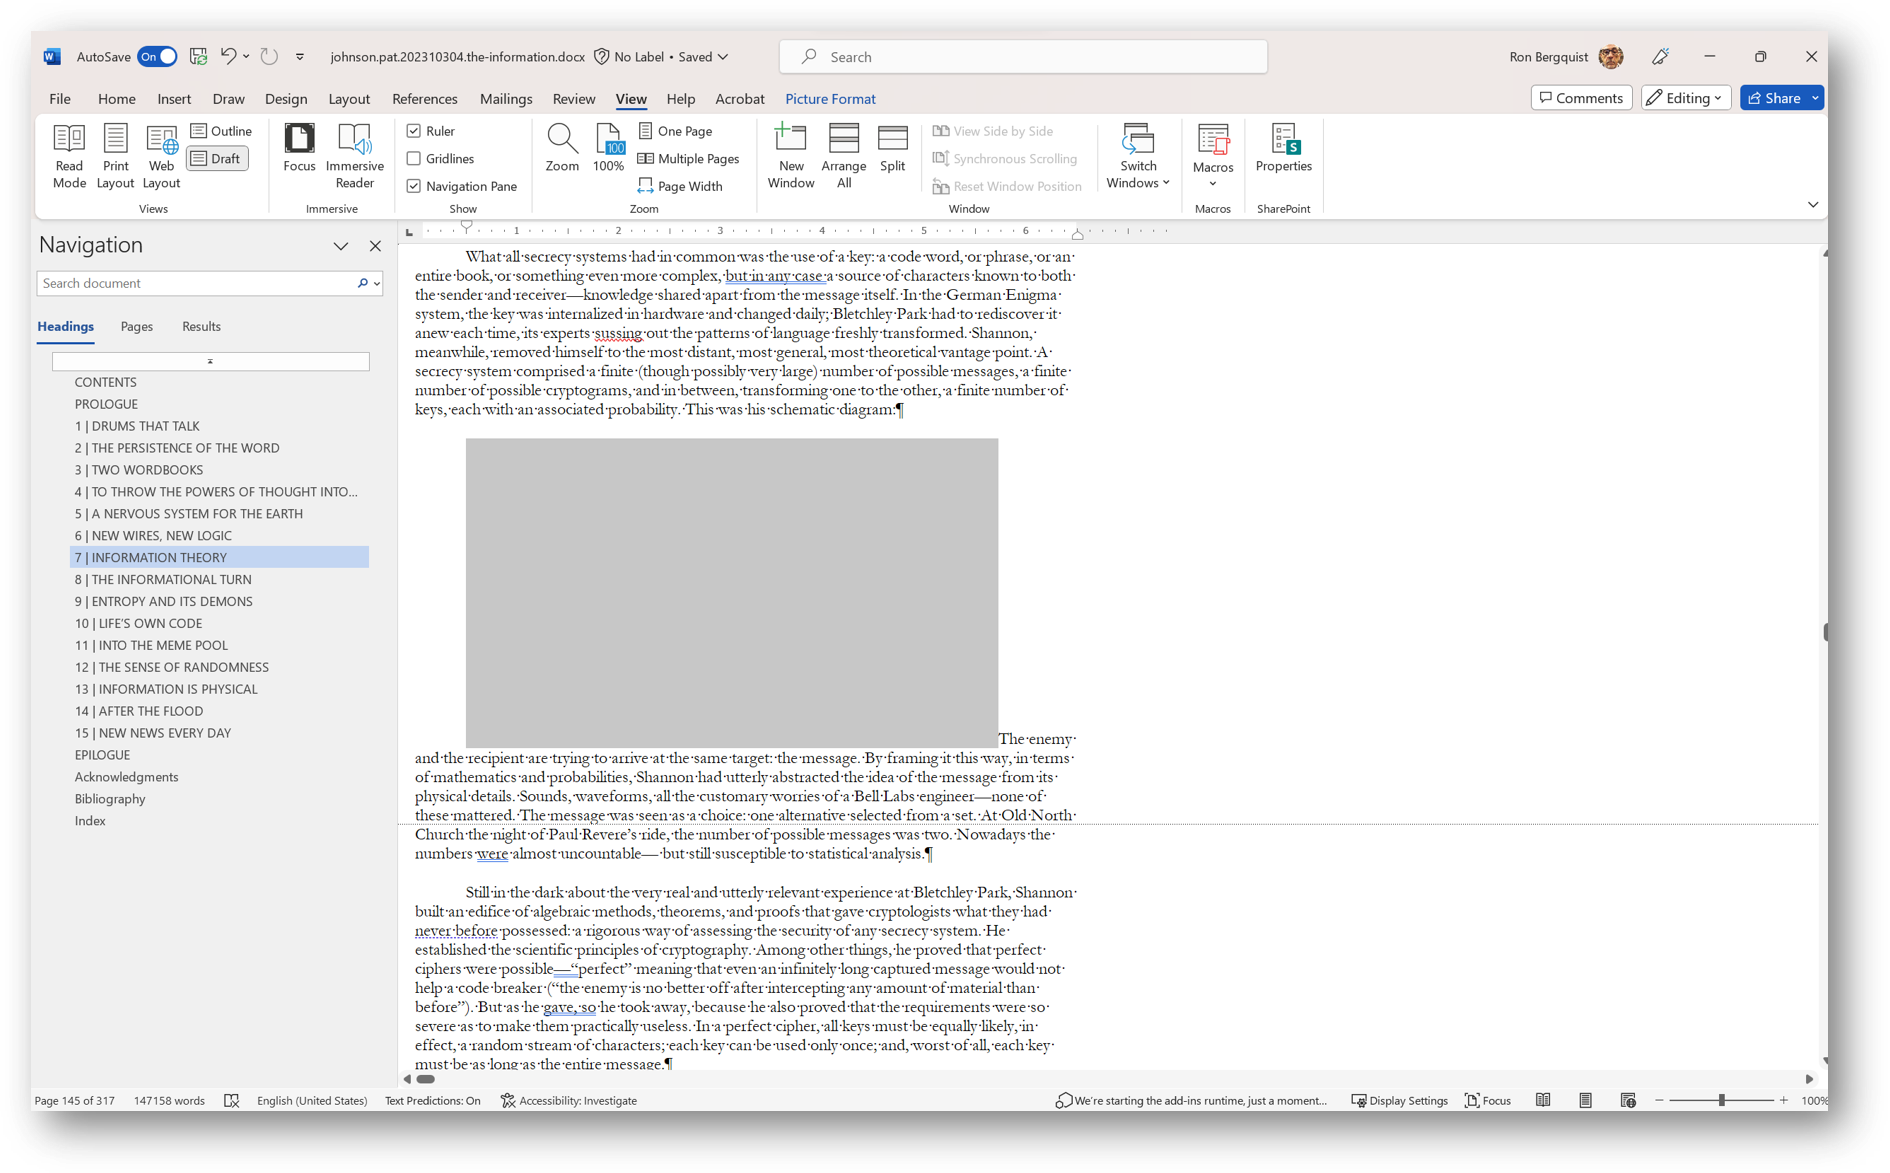 [MSWord 365 showing image inserted as in line with text]